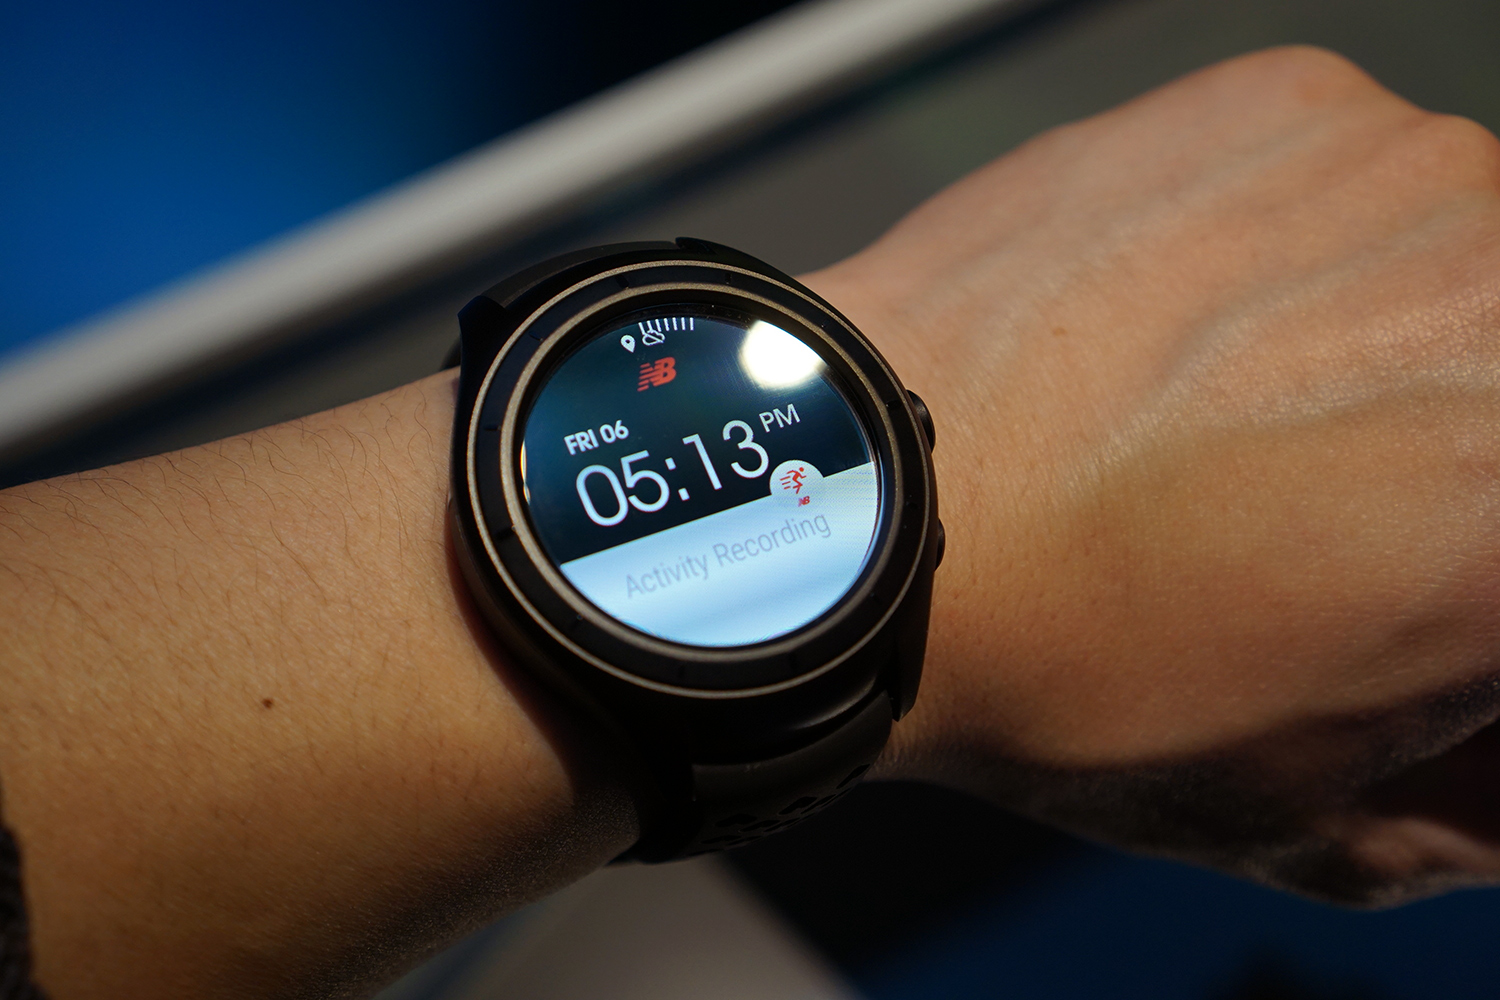 The Ultimate Guide to 2017's Android Wear Smartwatches | Digital Trends